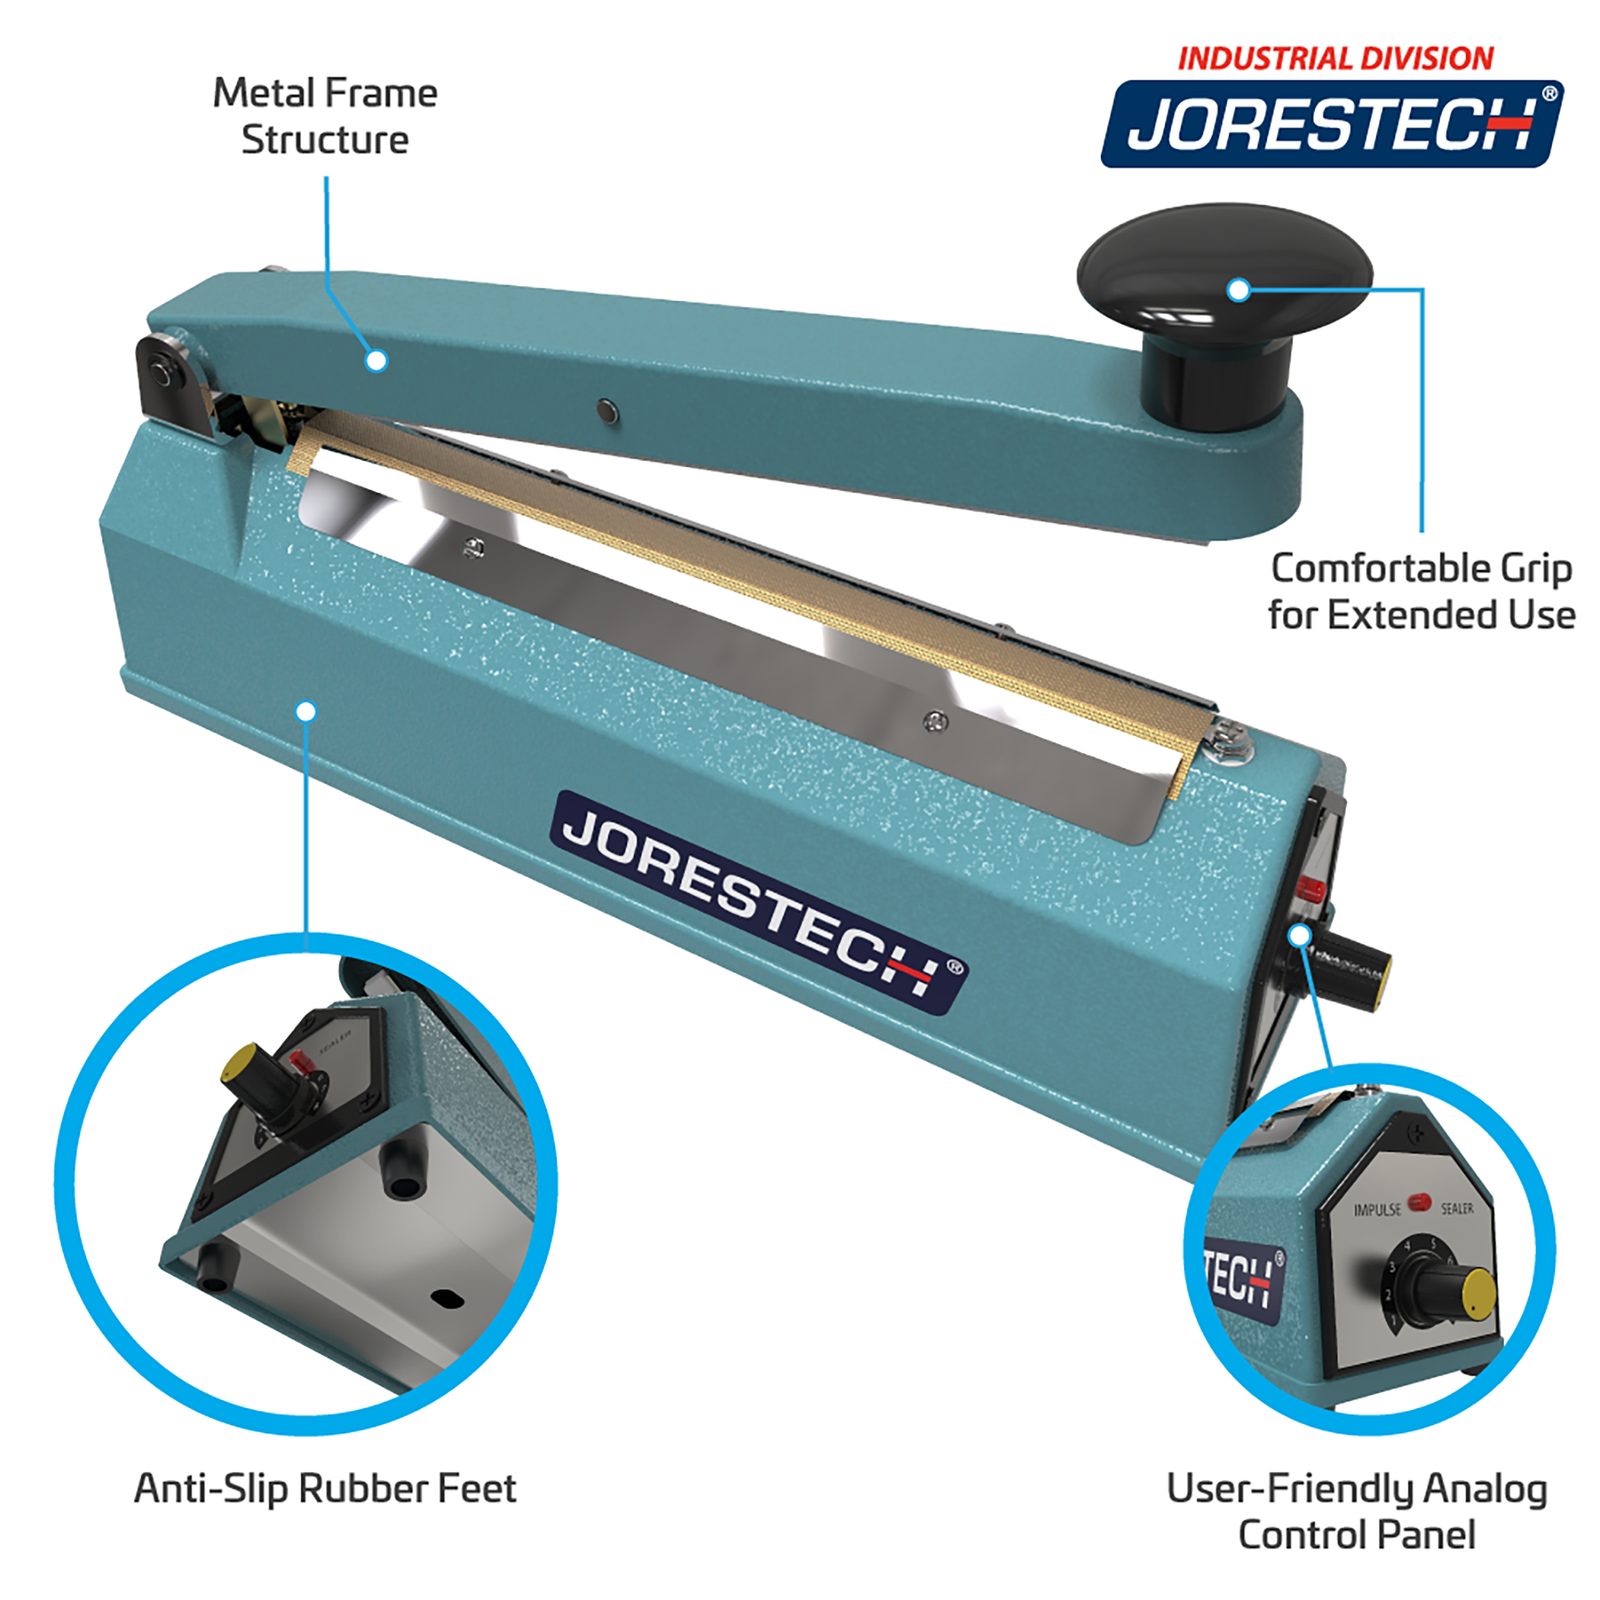 Manual impulse bag sealer by JORES TECHNOLOGIES®.. Features include, Metal Frame Structure, Comfortable Grip for Extended Use, Anti-slip Rubber Feet, and User Friendly Analog Control Panel. Close-ups of rubber feet and control panel